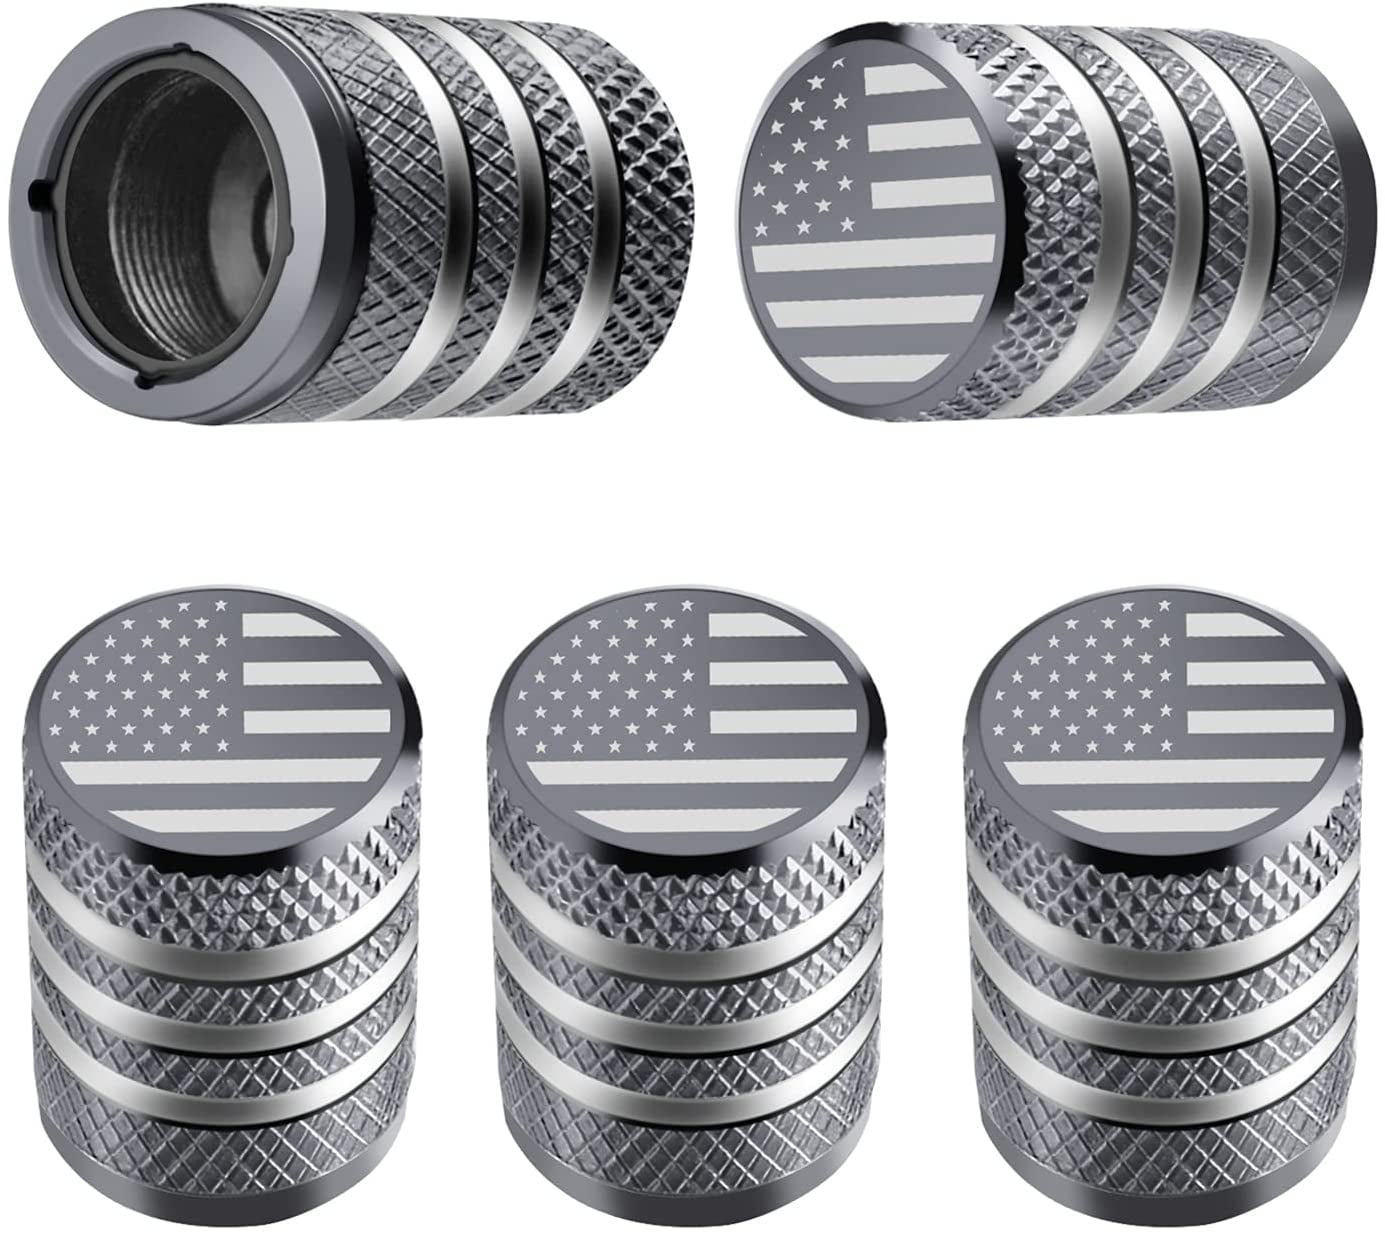 12 Pack Tire Valve Stem Cap Cover Tire Air Cap Metal with Plastic Liner Corrosion Resistant Leak-Proof American Flag for Car Truck Motorcycle Bike 